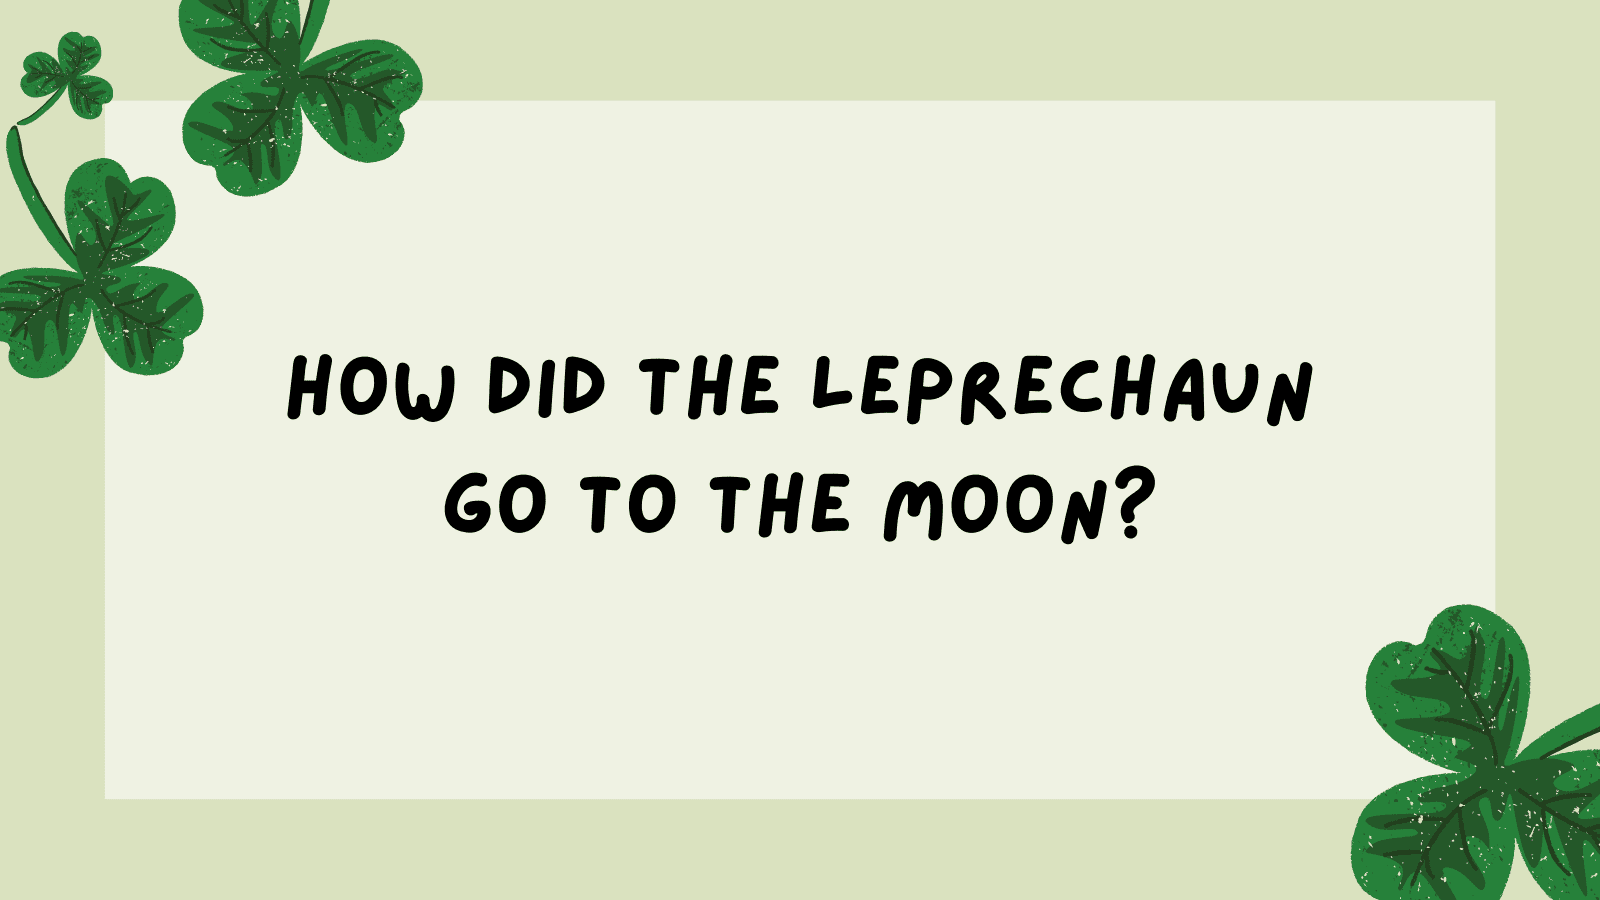 How did the leprechaun go to the moon?